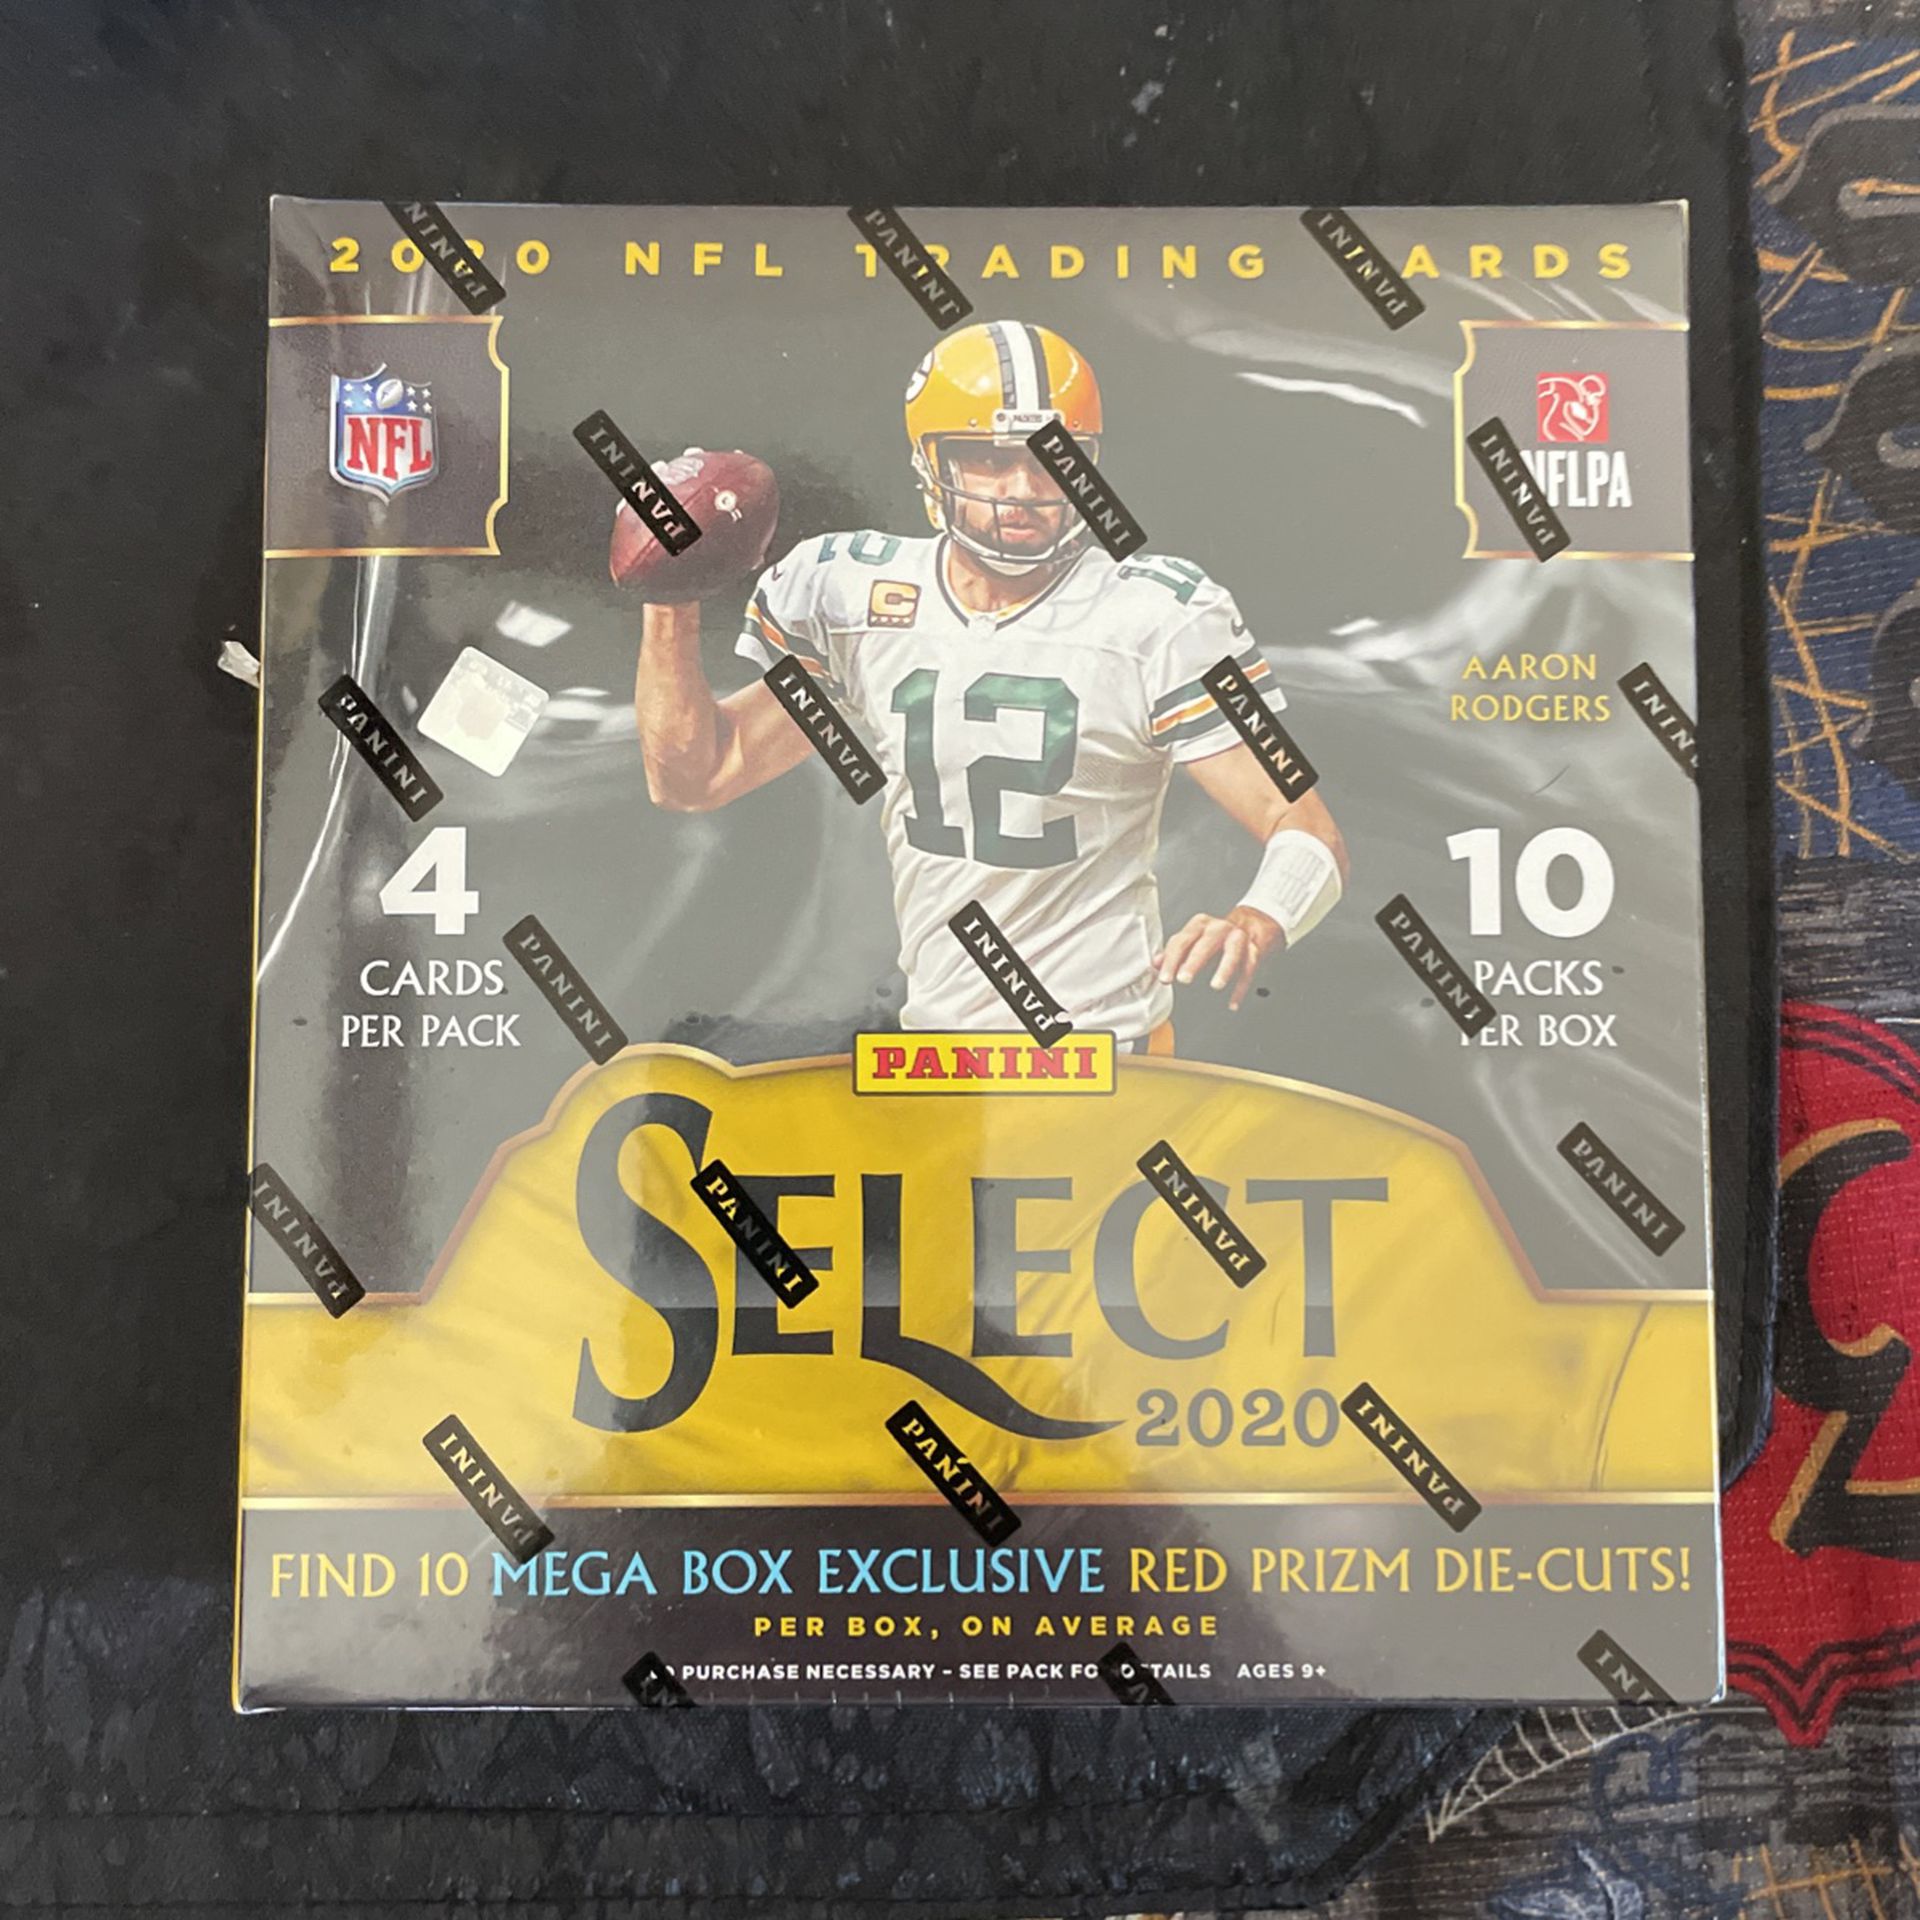  Select 2020 NFL Make a box with the red Prizm Die cut